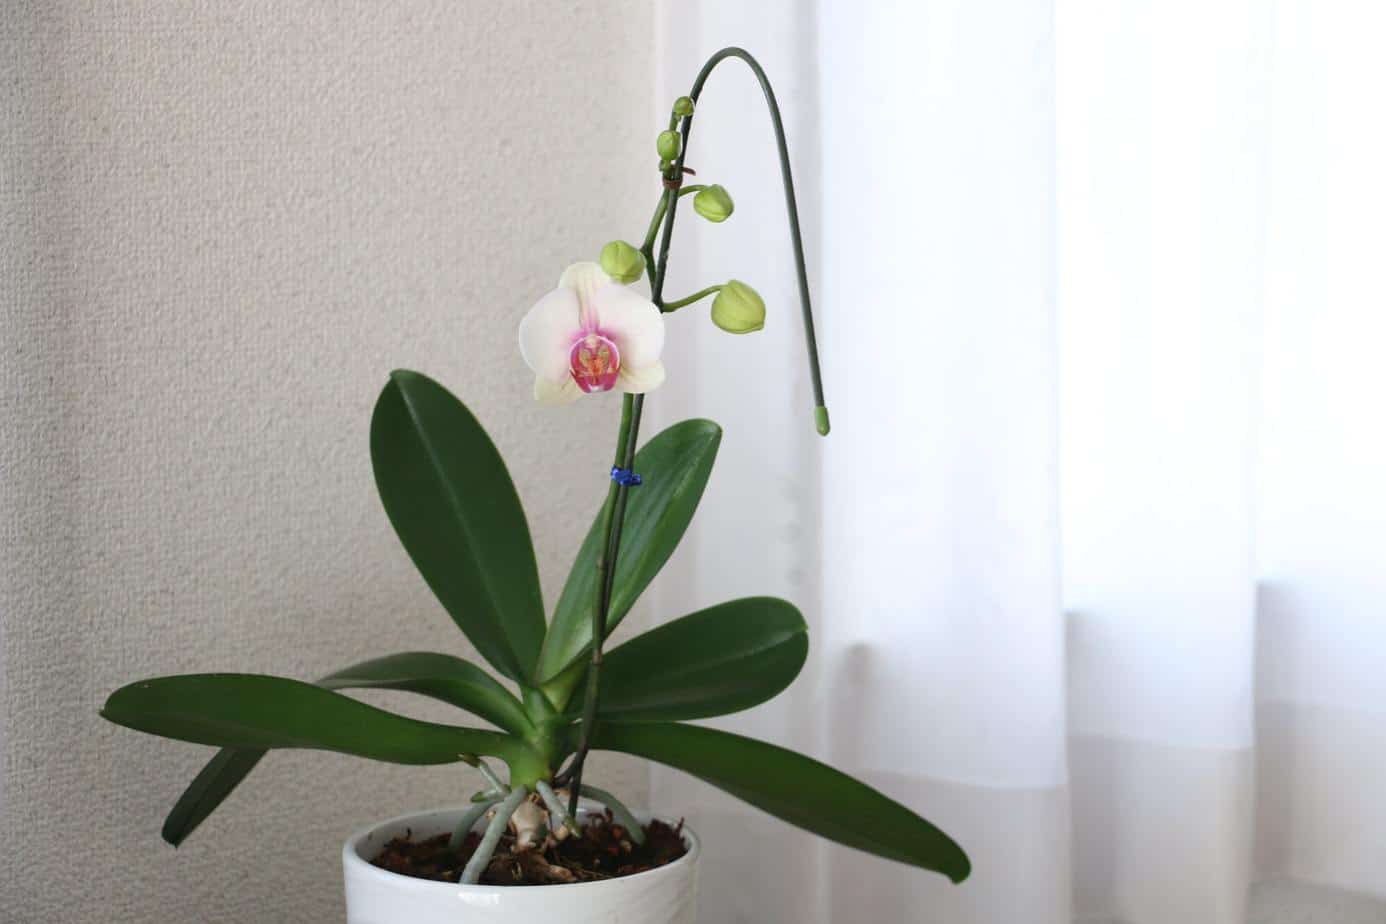 How to care for orchids?